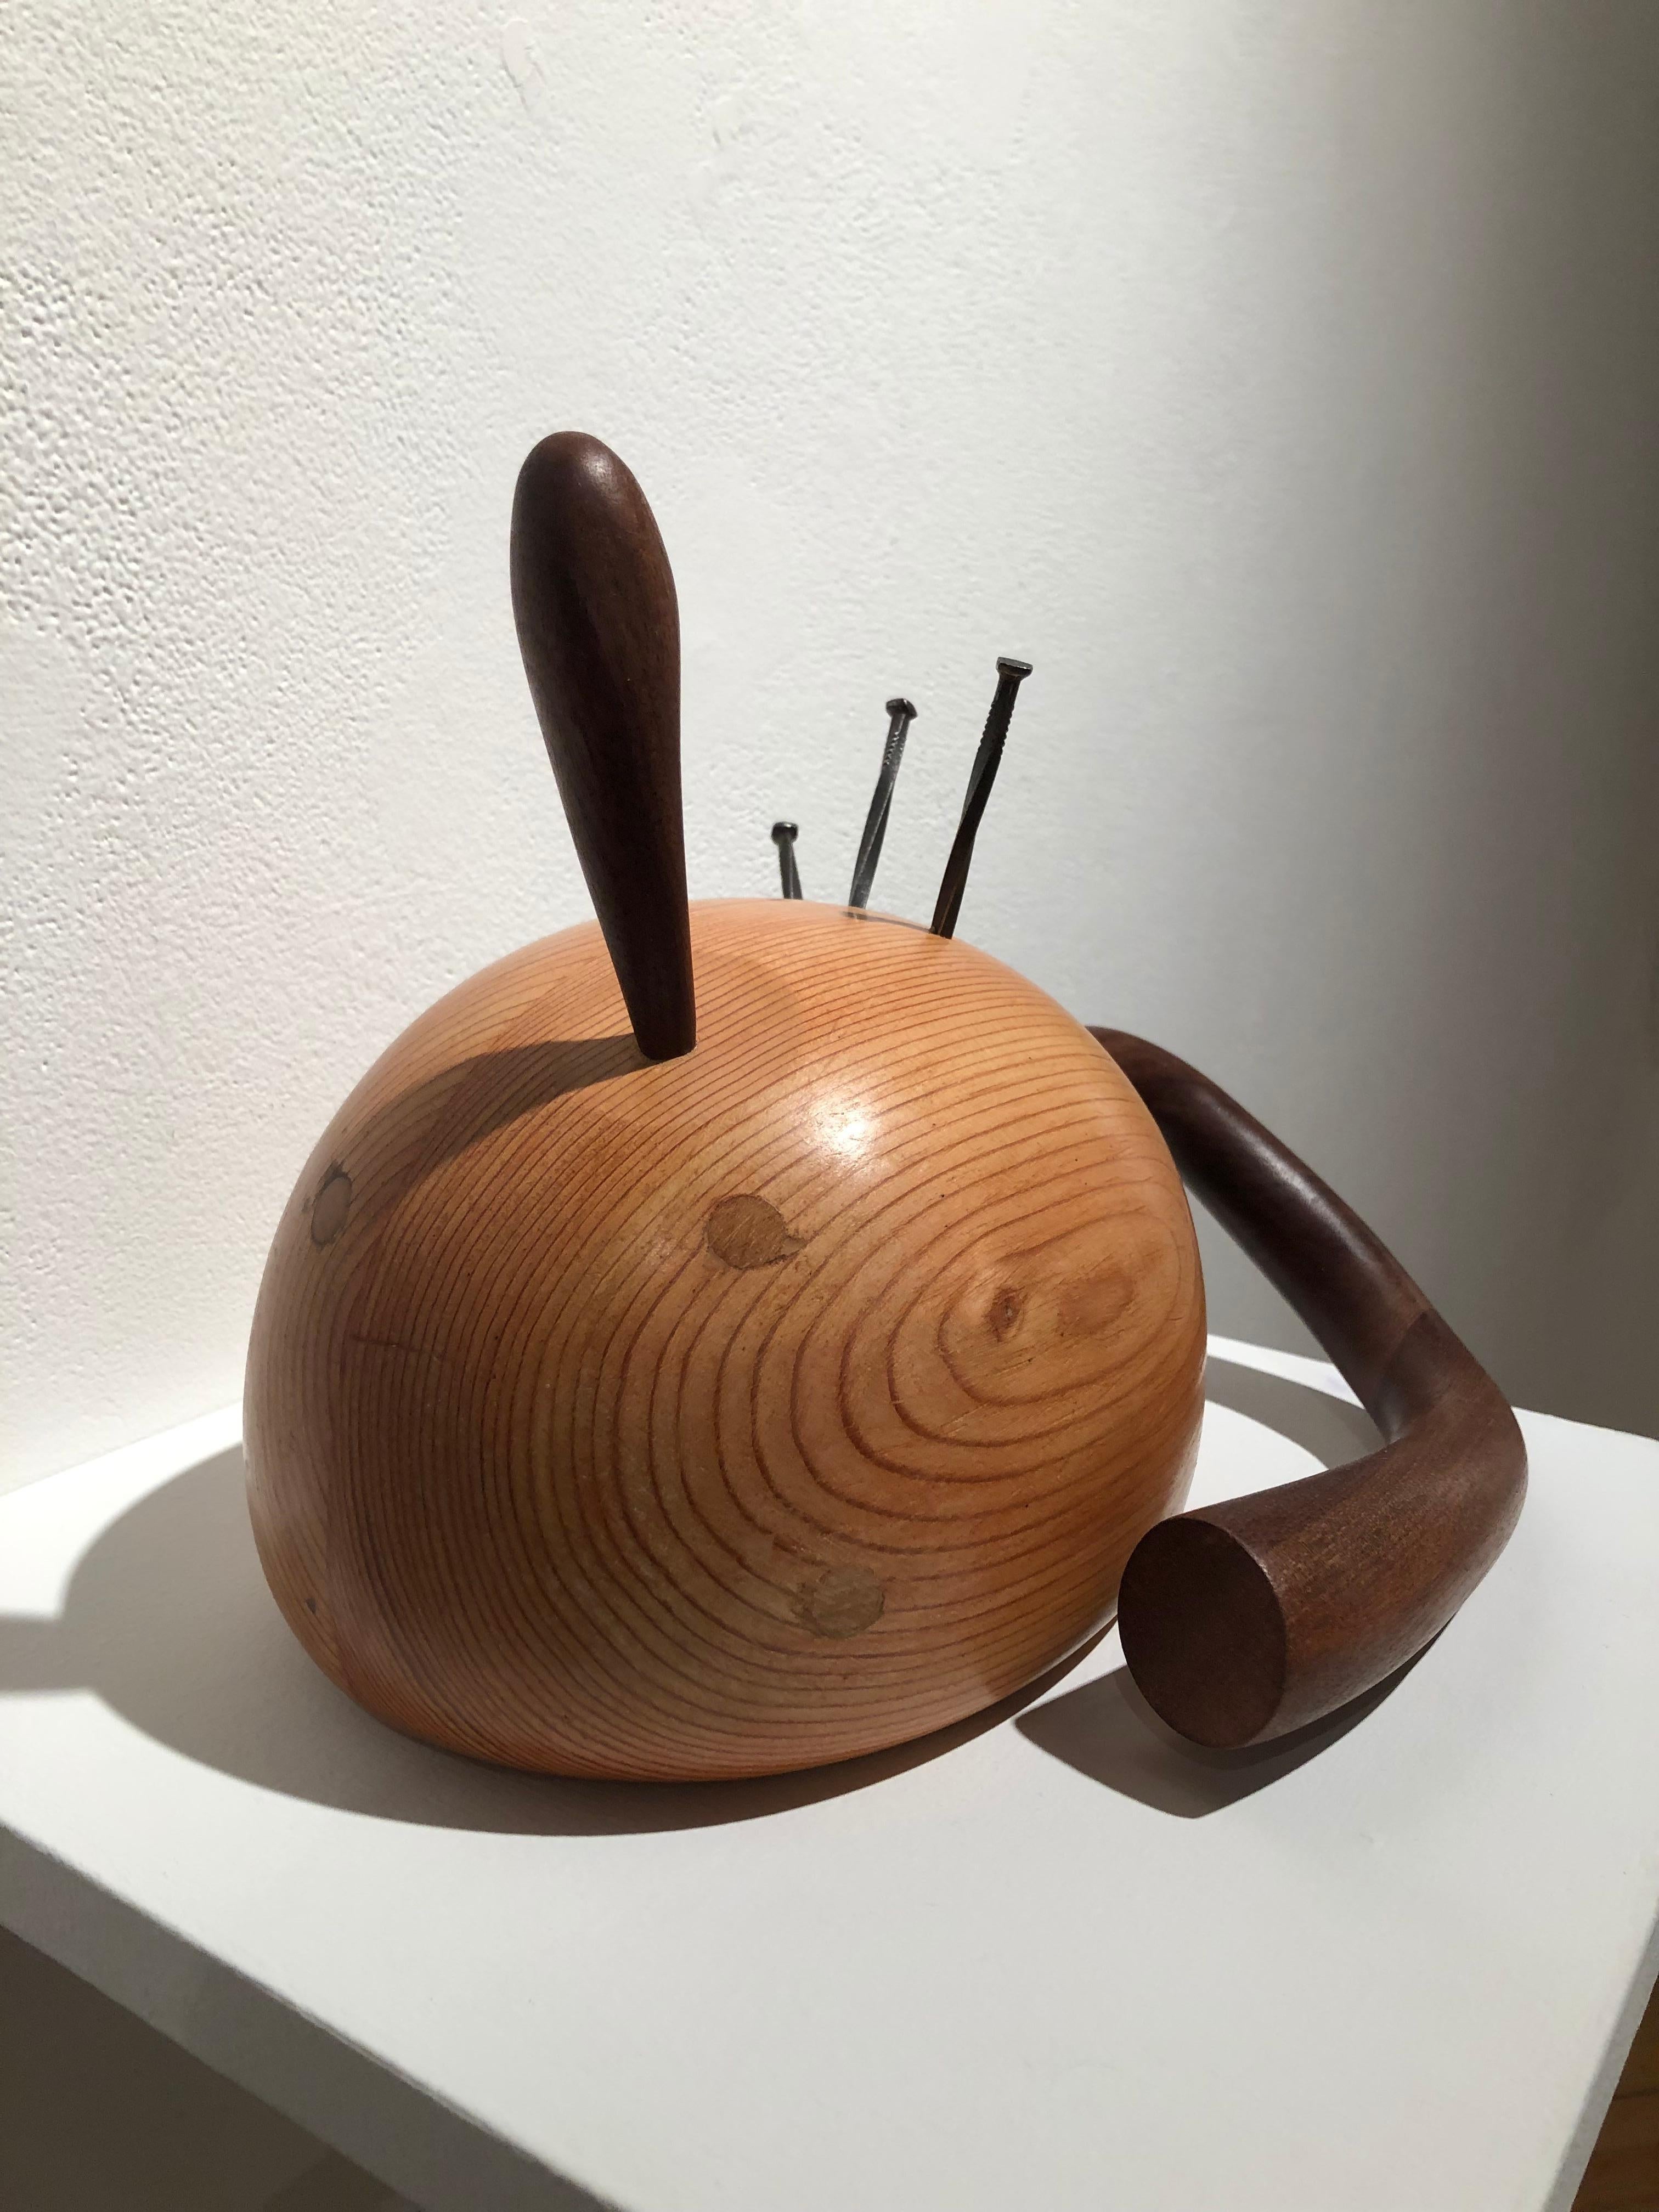 John Maloof, 3 Nails, 2018, 8 in tall
pine, walnut, nails

Hand carved organic abstract sculpture using reclaimed wood. 

John Maloof (of Vivian Maier fame) is an artist based in Chicago. The gallery is pleased to present his new body of work in